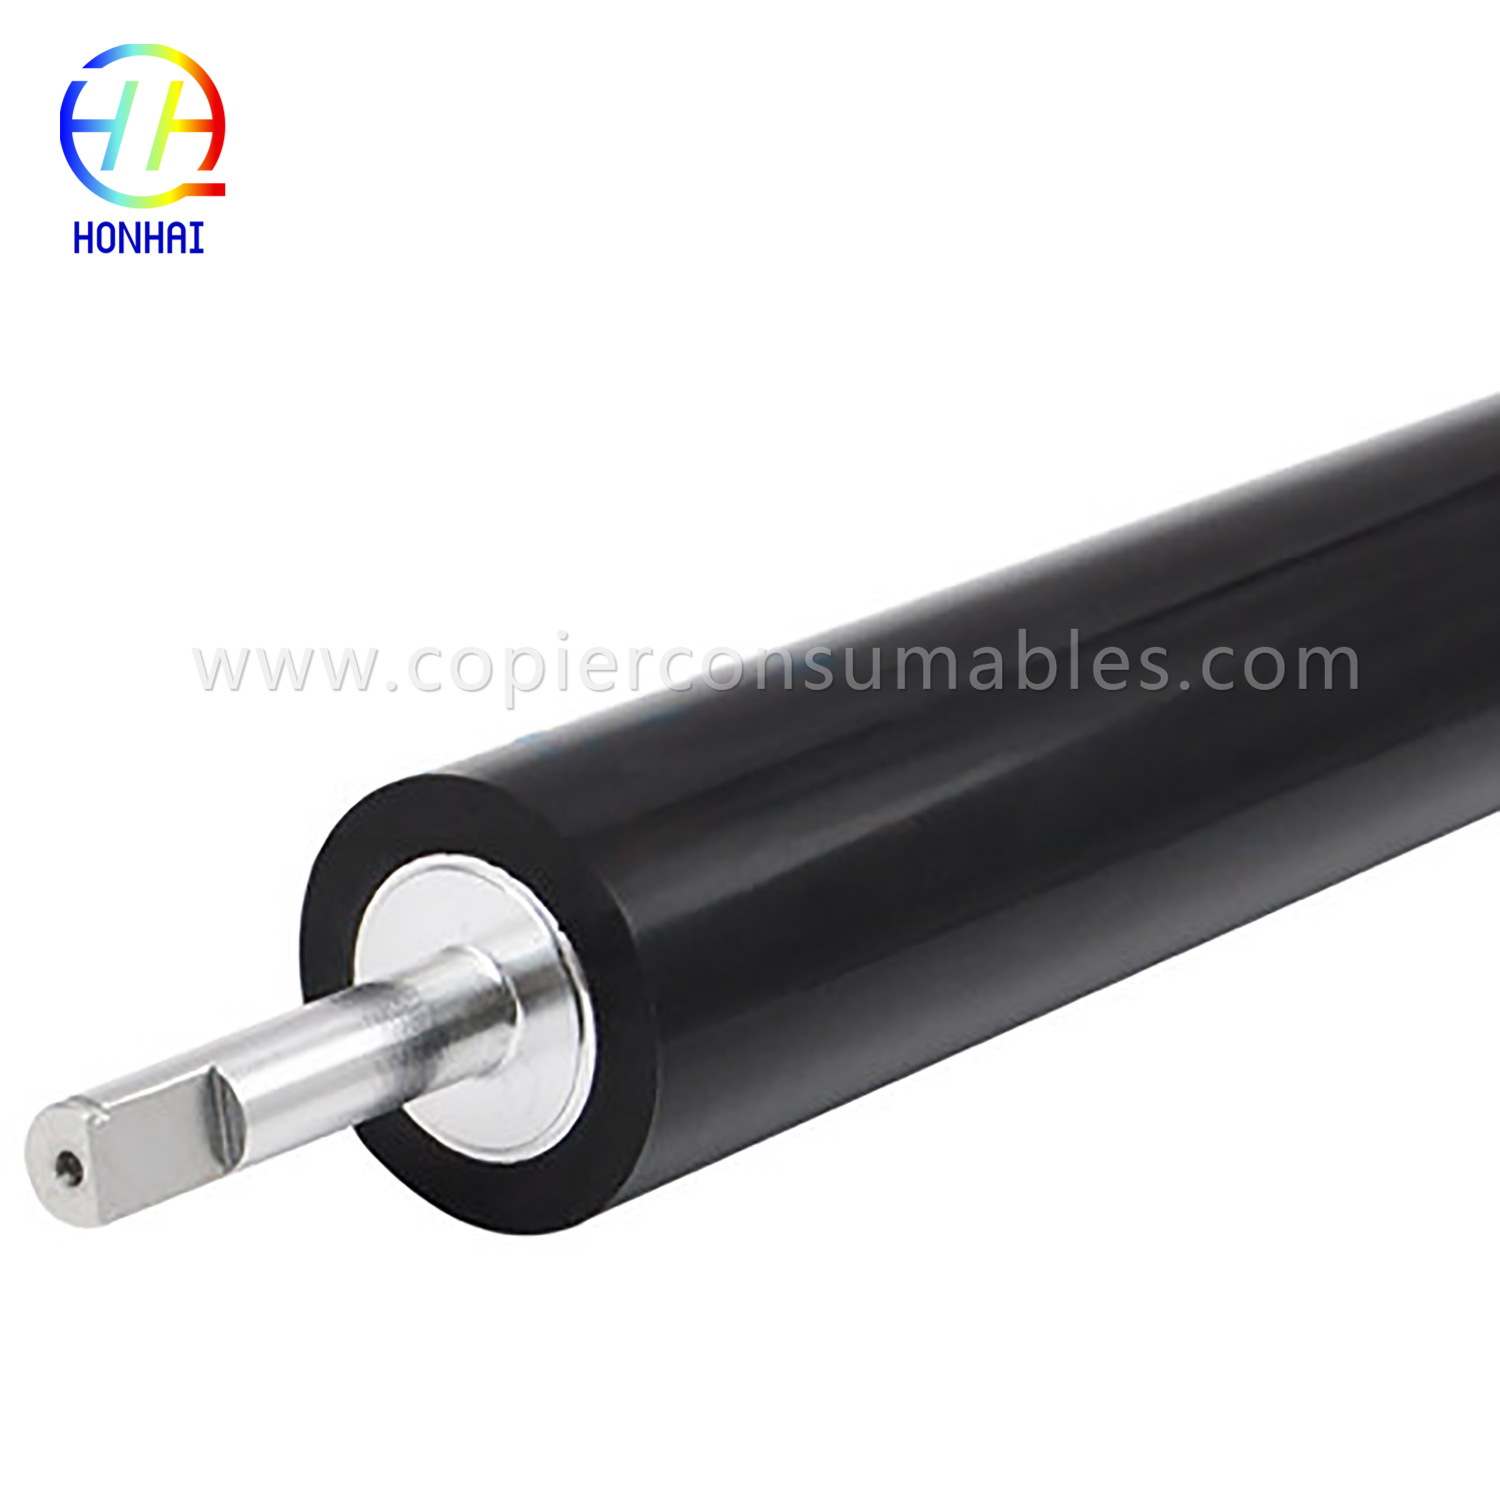 Lower Pressure Roller for HP M601 (2) เพิ่มเติม